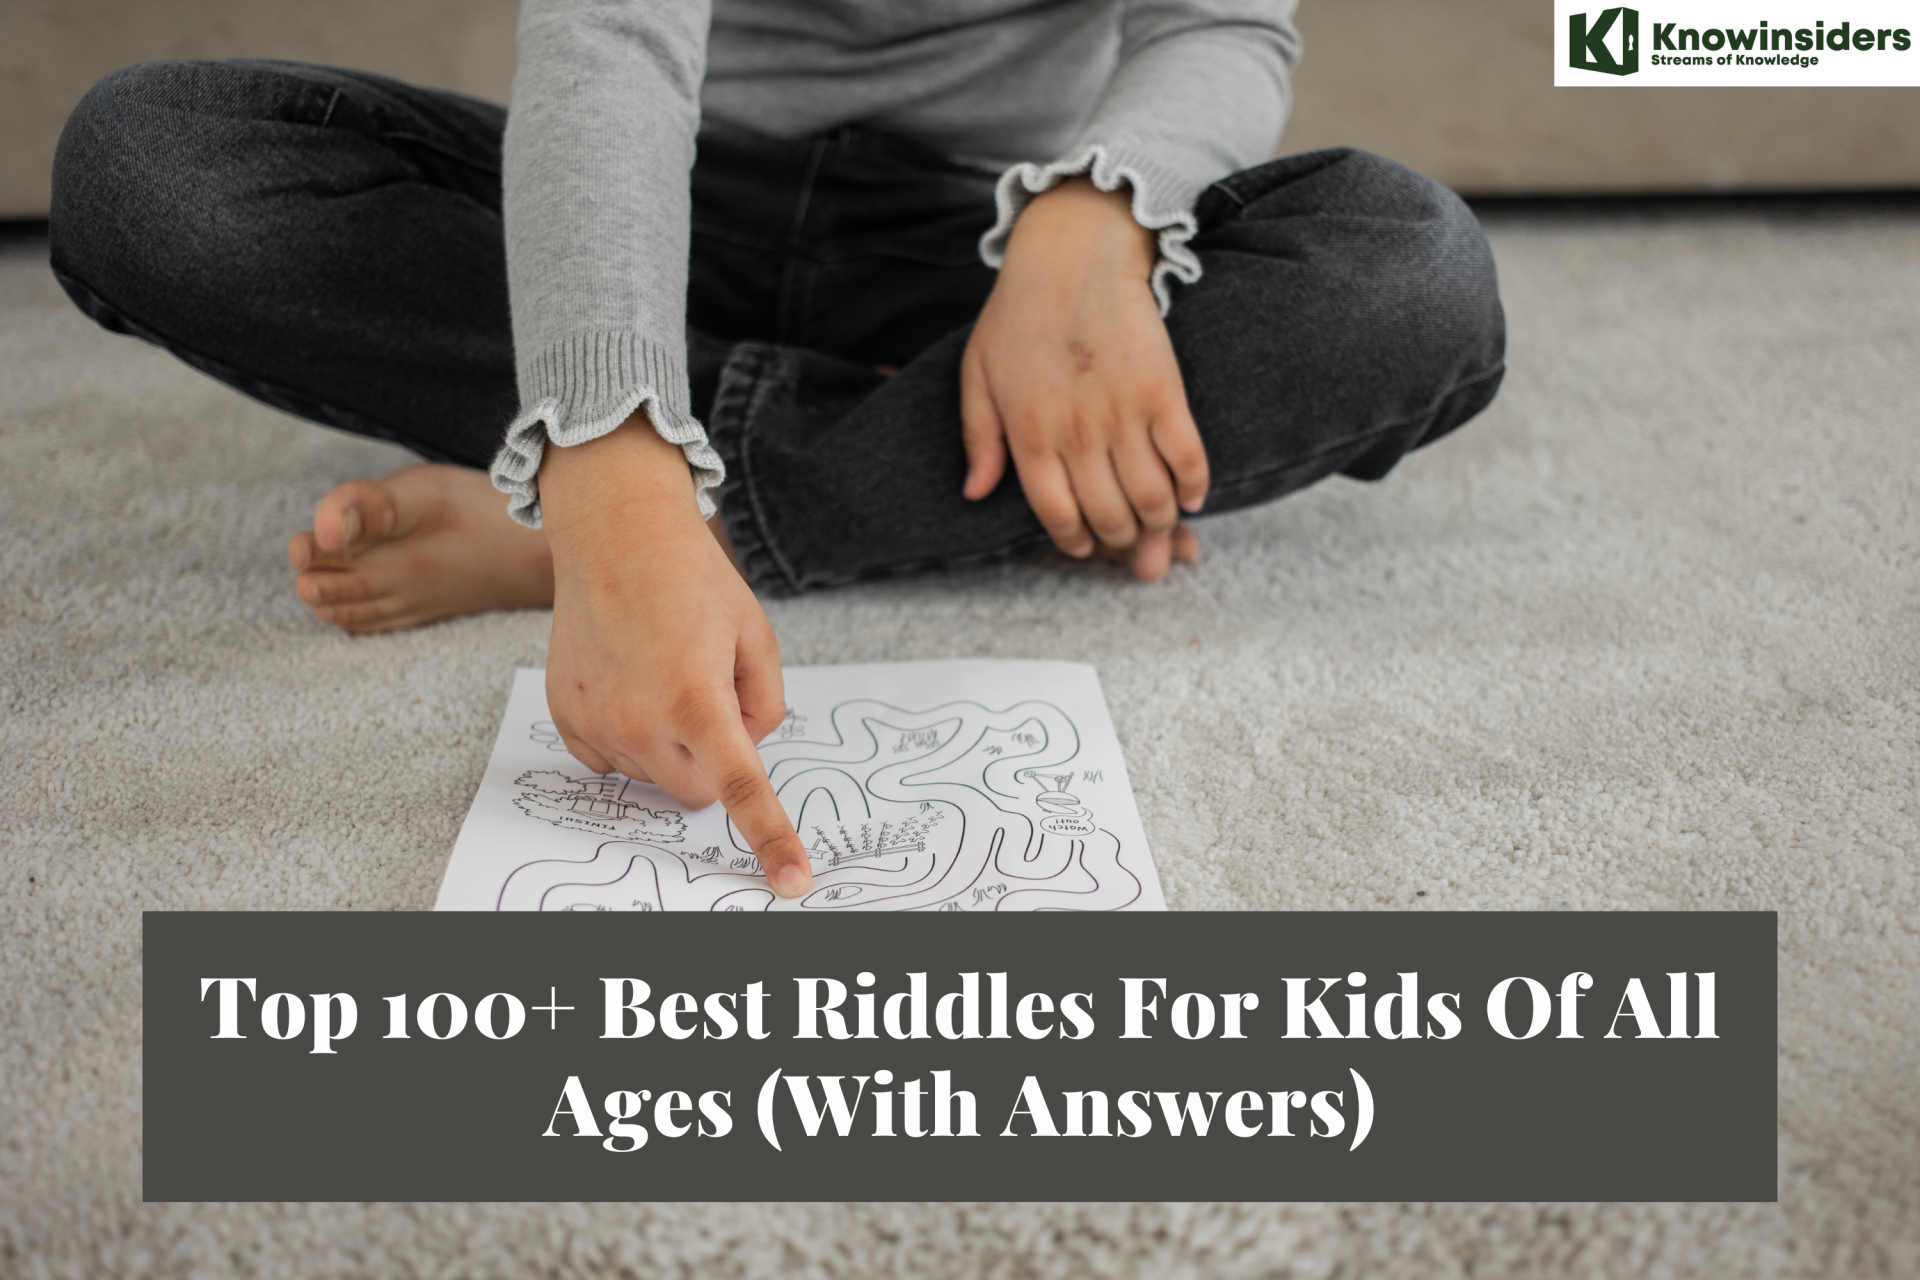 Top 100+ Best Riddles For Kids Of All Ages With Best Answers